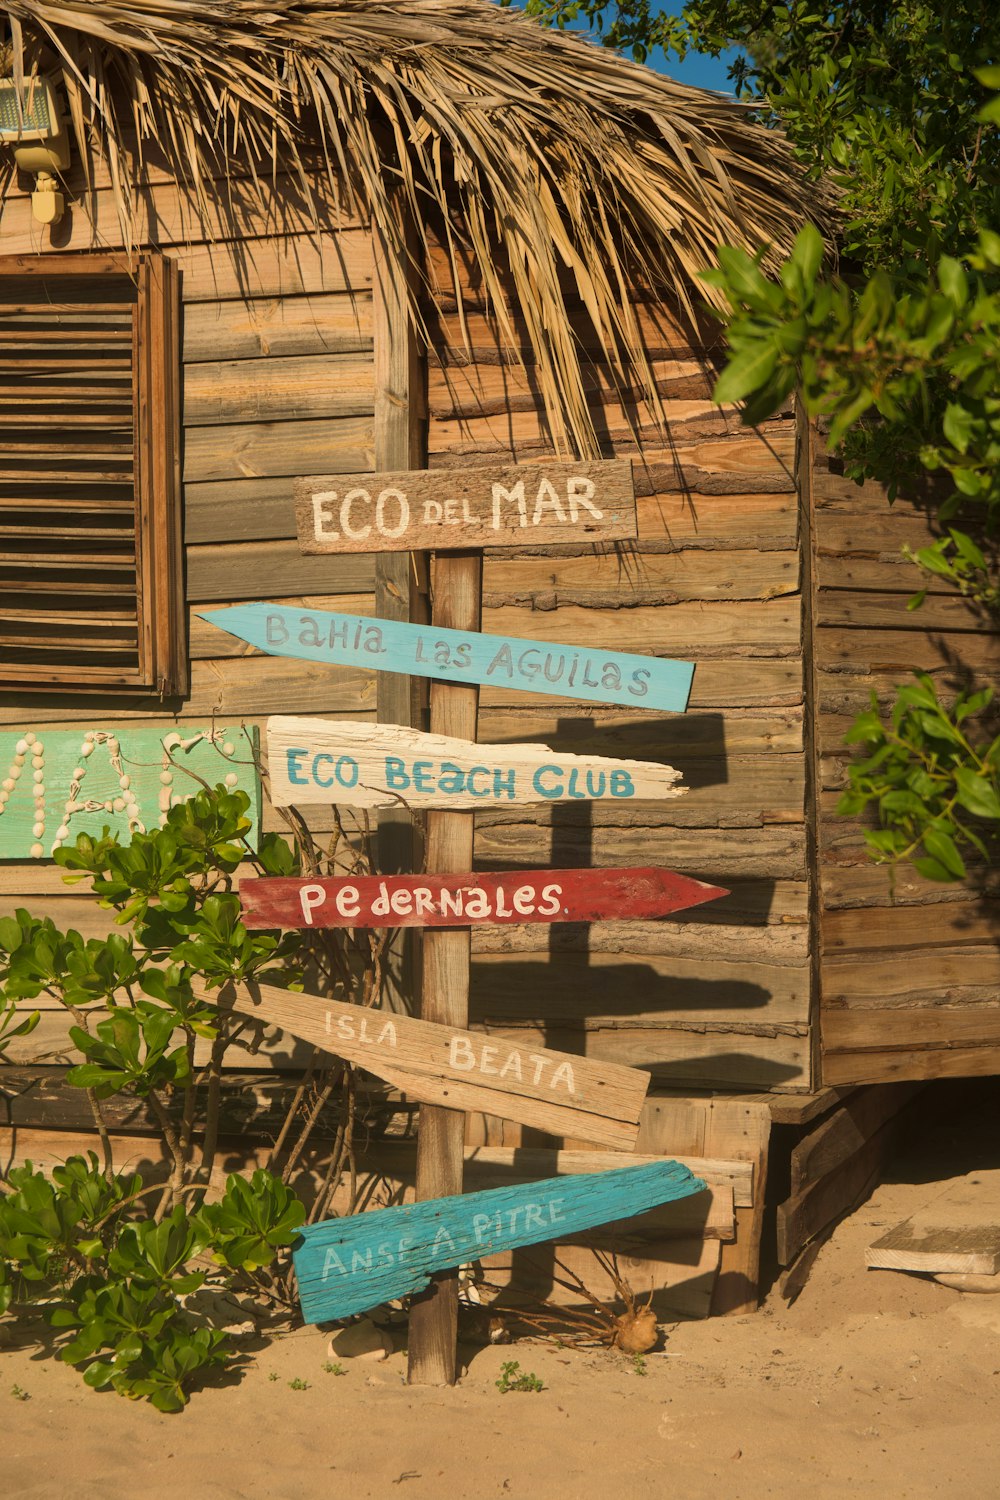 a wooden building with a thatched roof and a sign that says eco del mar